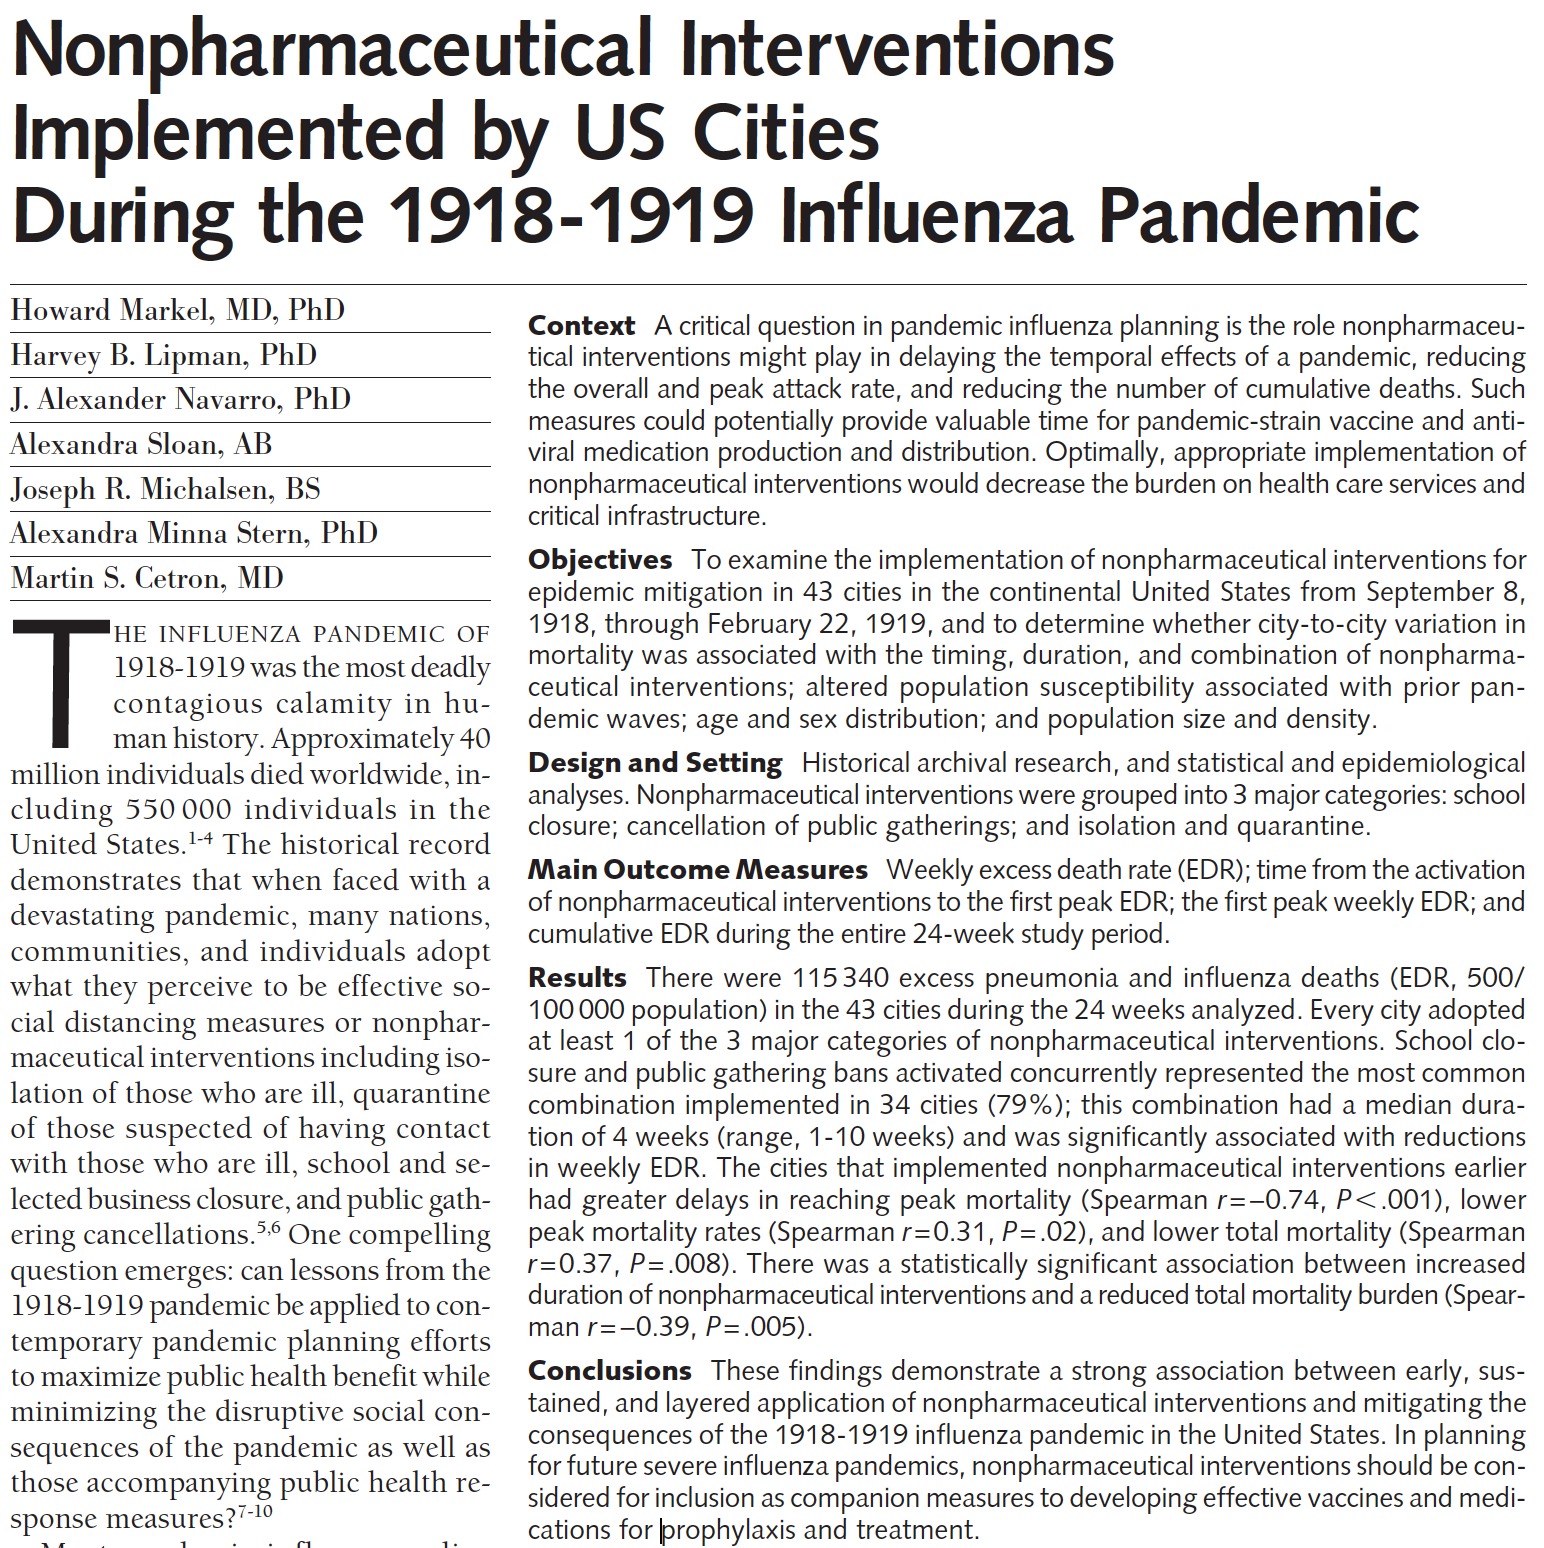 Nonpharmaceutical Interventions Implemented by US Cities During the 1918-1919 Influenza Pandemic, https://jamanetwork.com/journals/jama/fullarticle/208354